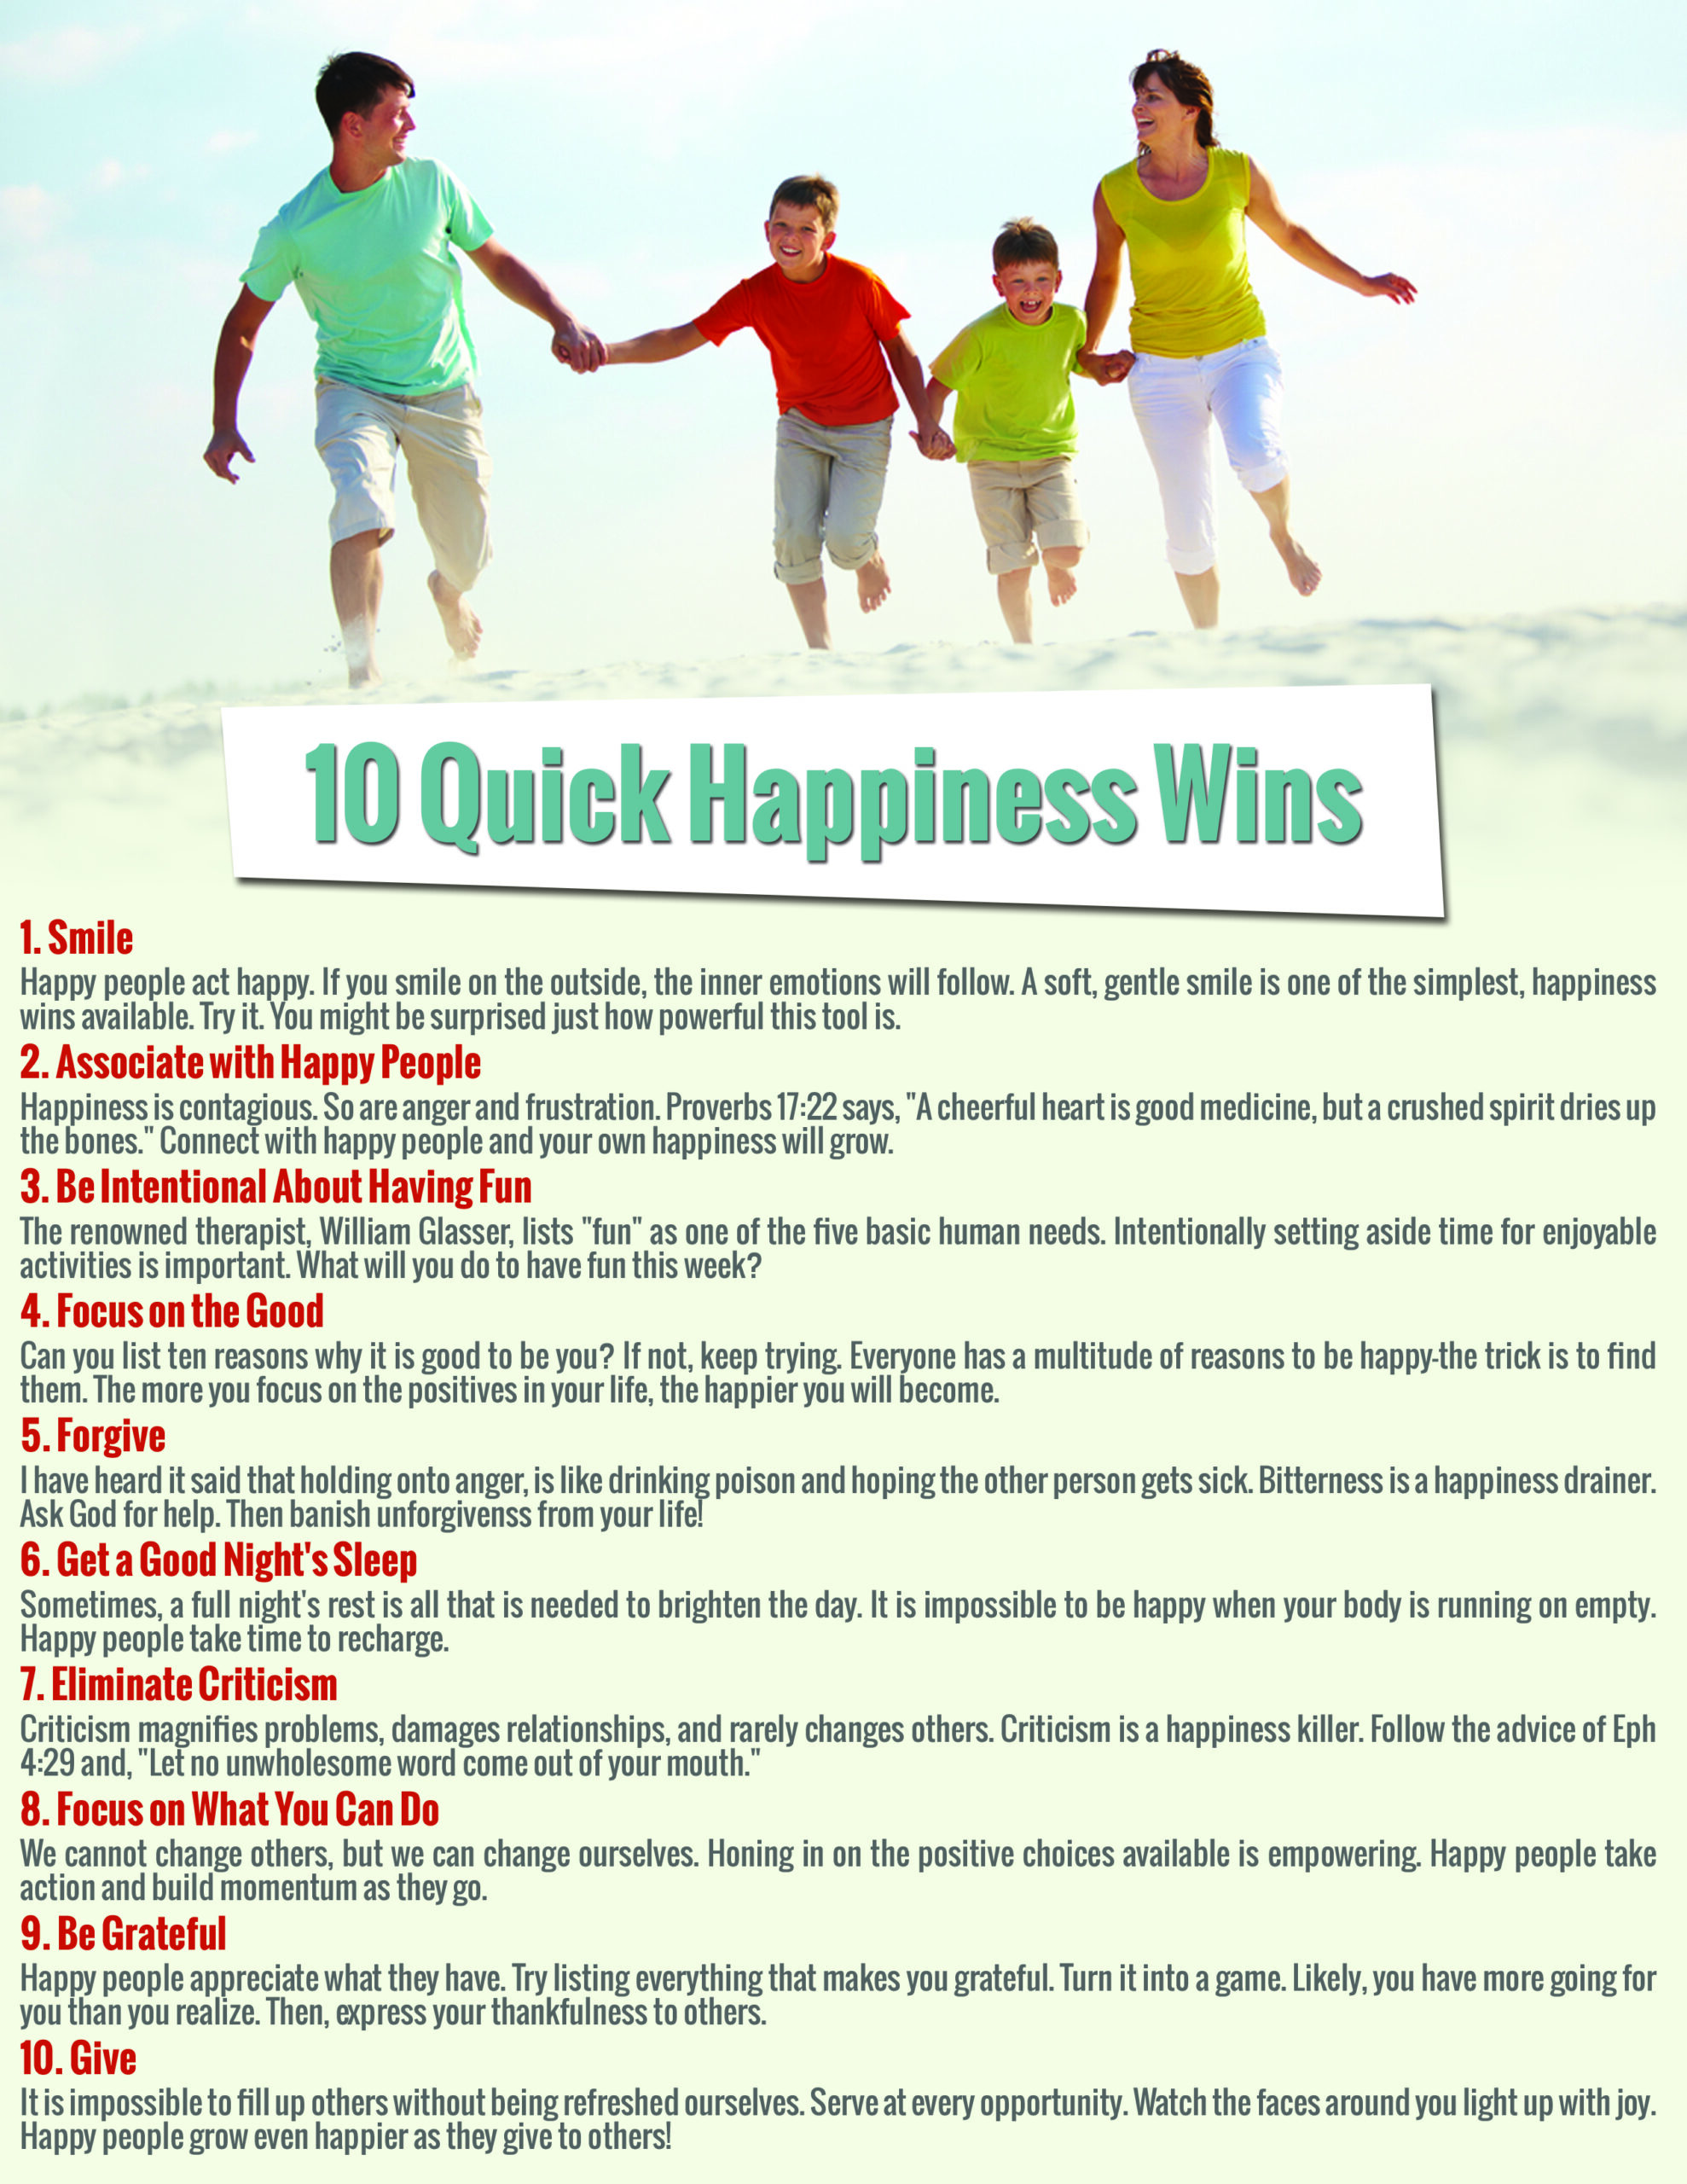 Tips for Happiness - How to Be Happier Today with a Smile